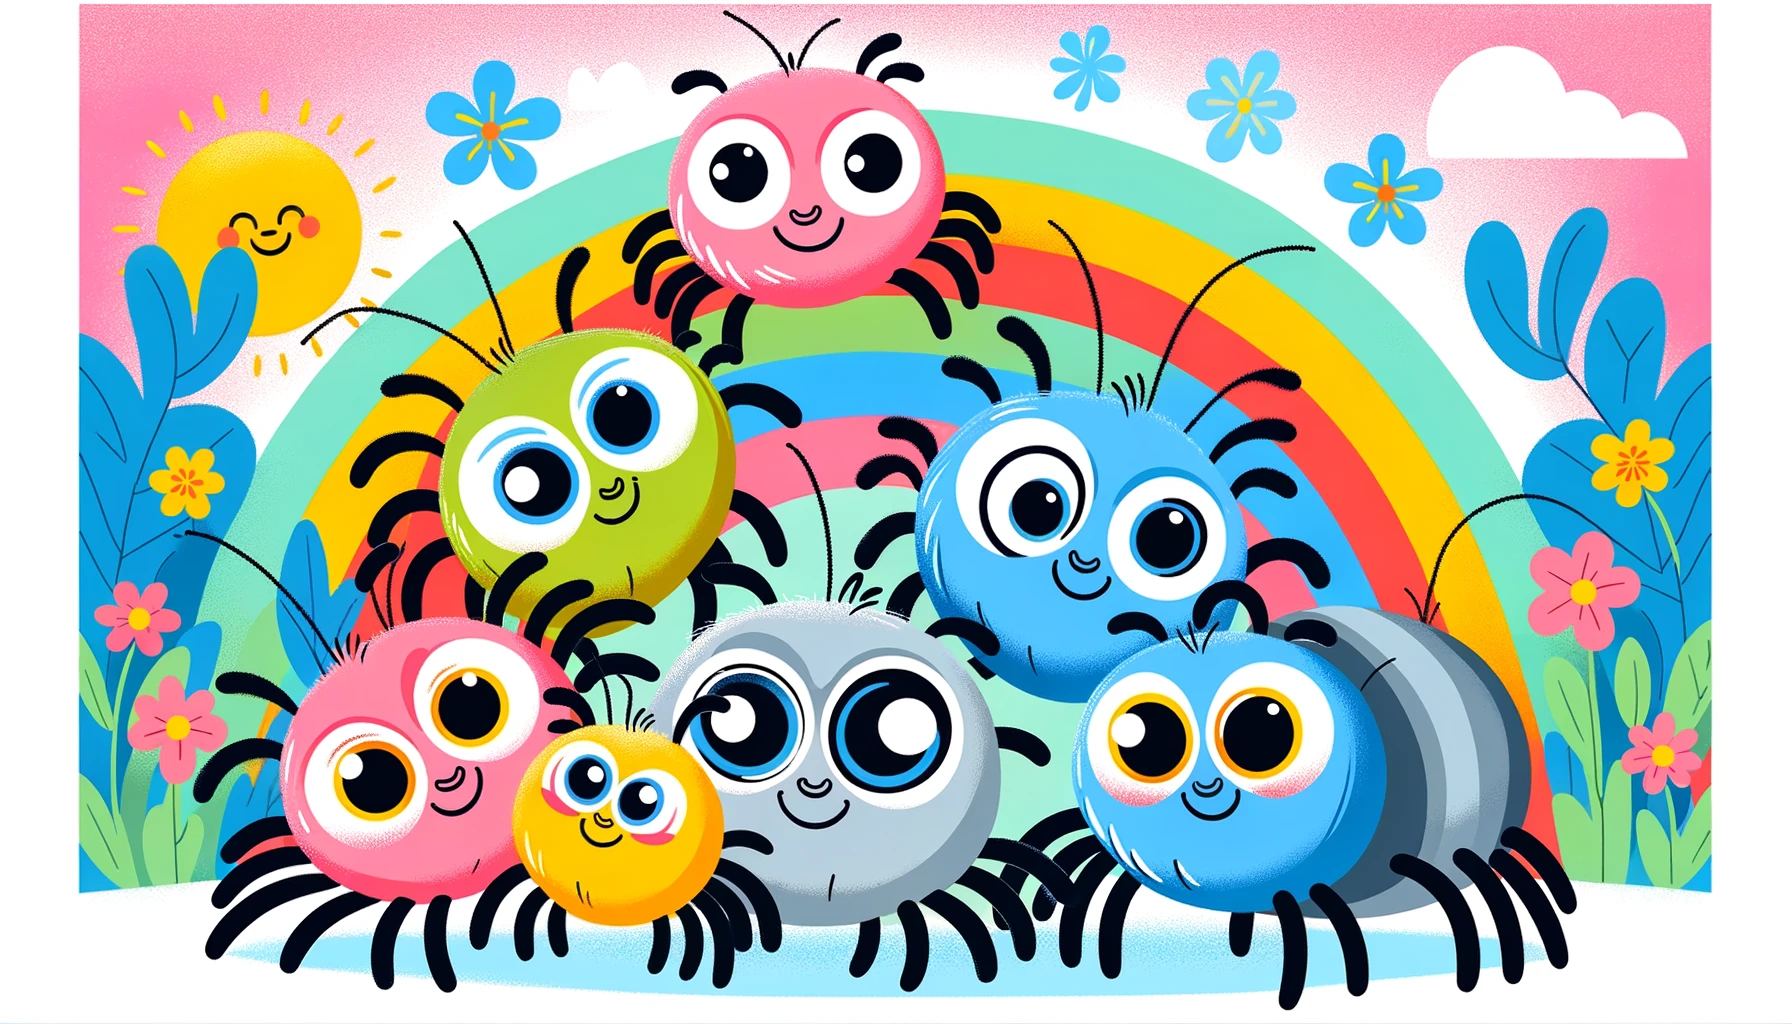 5 Little Spiders Preschool Circle Time Song - Fantastic Fun & Learning